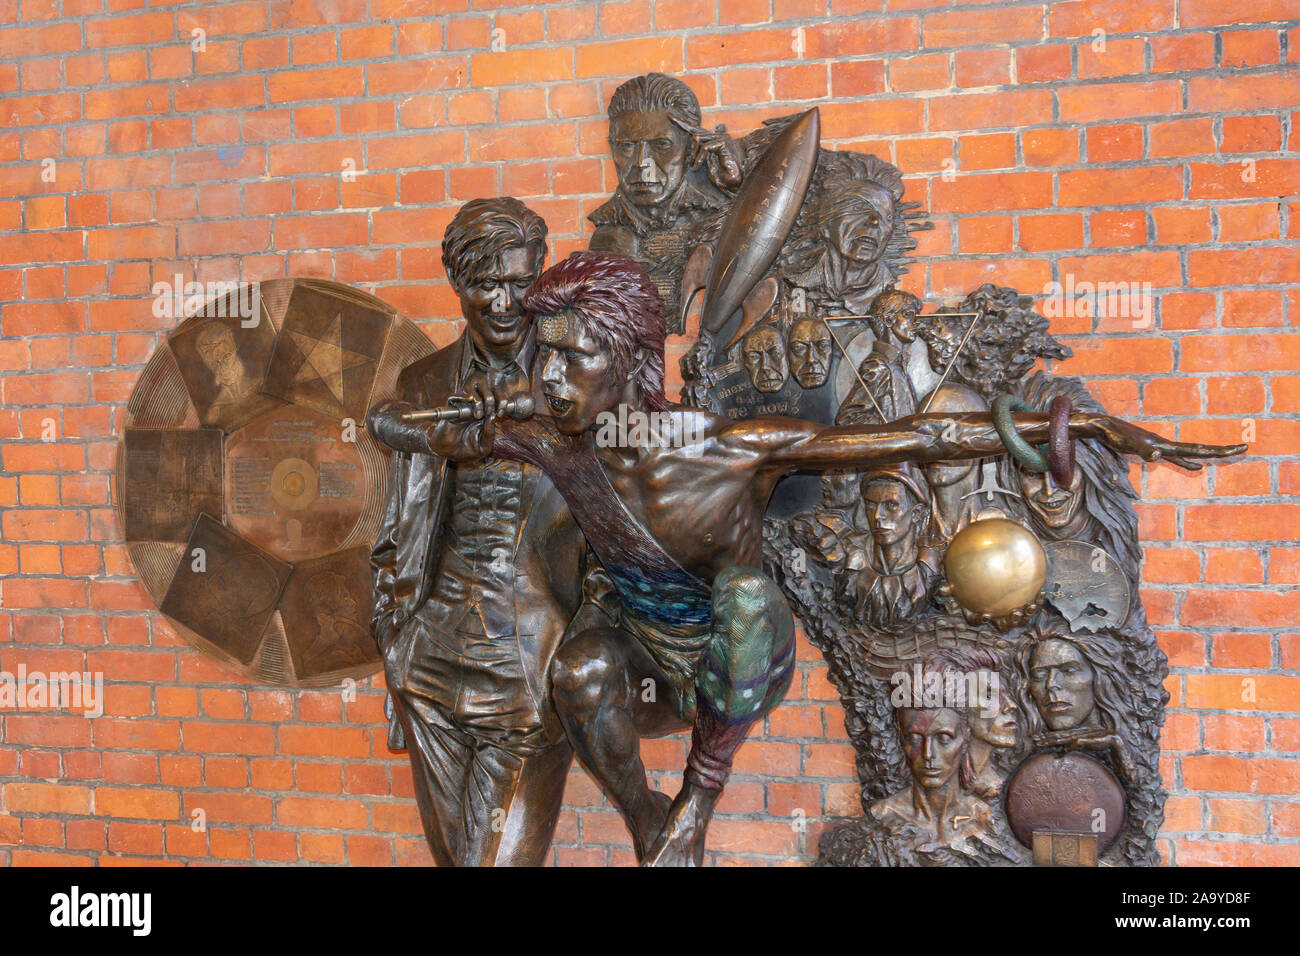 'Earthly Messenger' wall sculpture dedicated to David Bowie, Market Square, Aylesbury, Buckinghamshire, England, United Kingdom Stock Photo